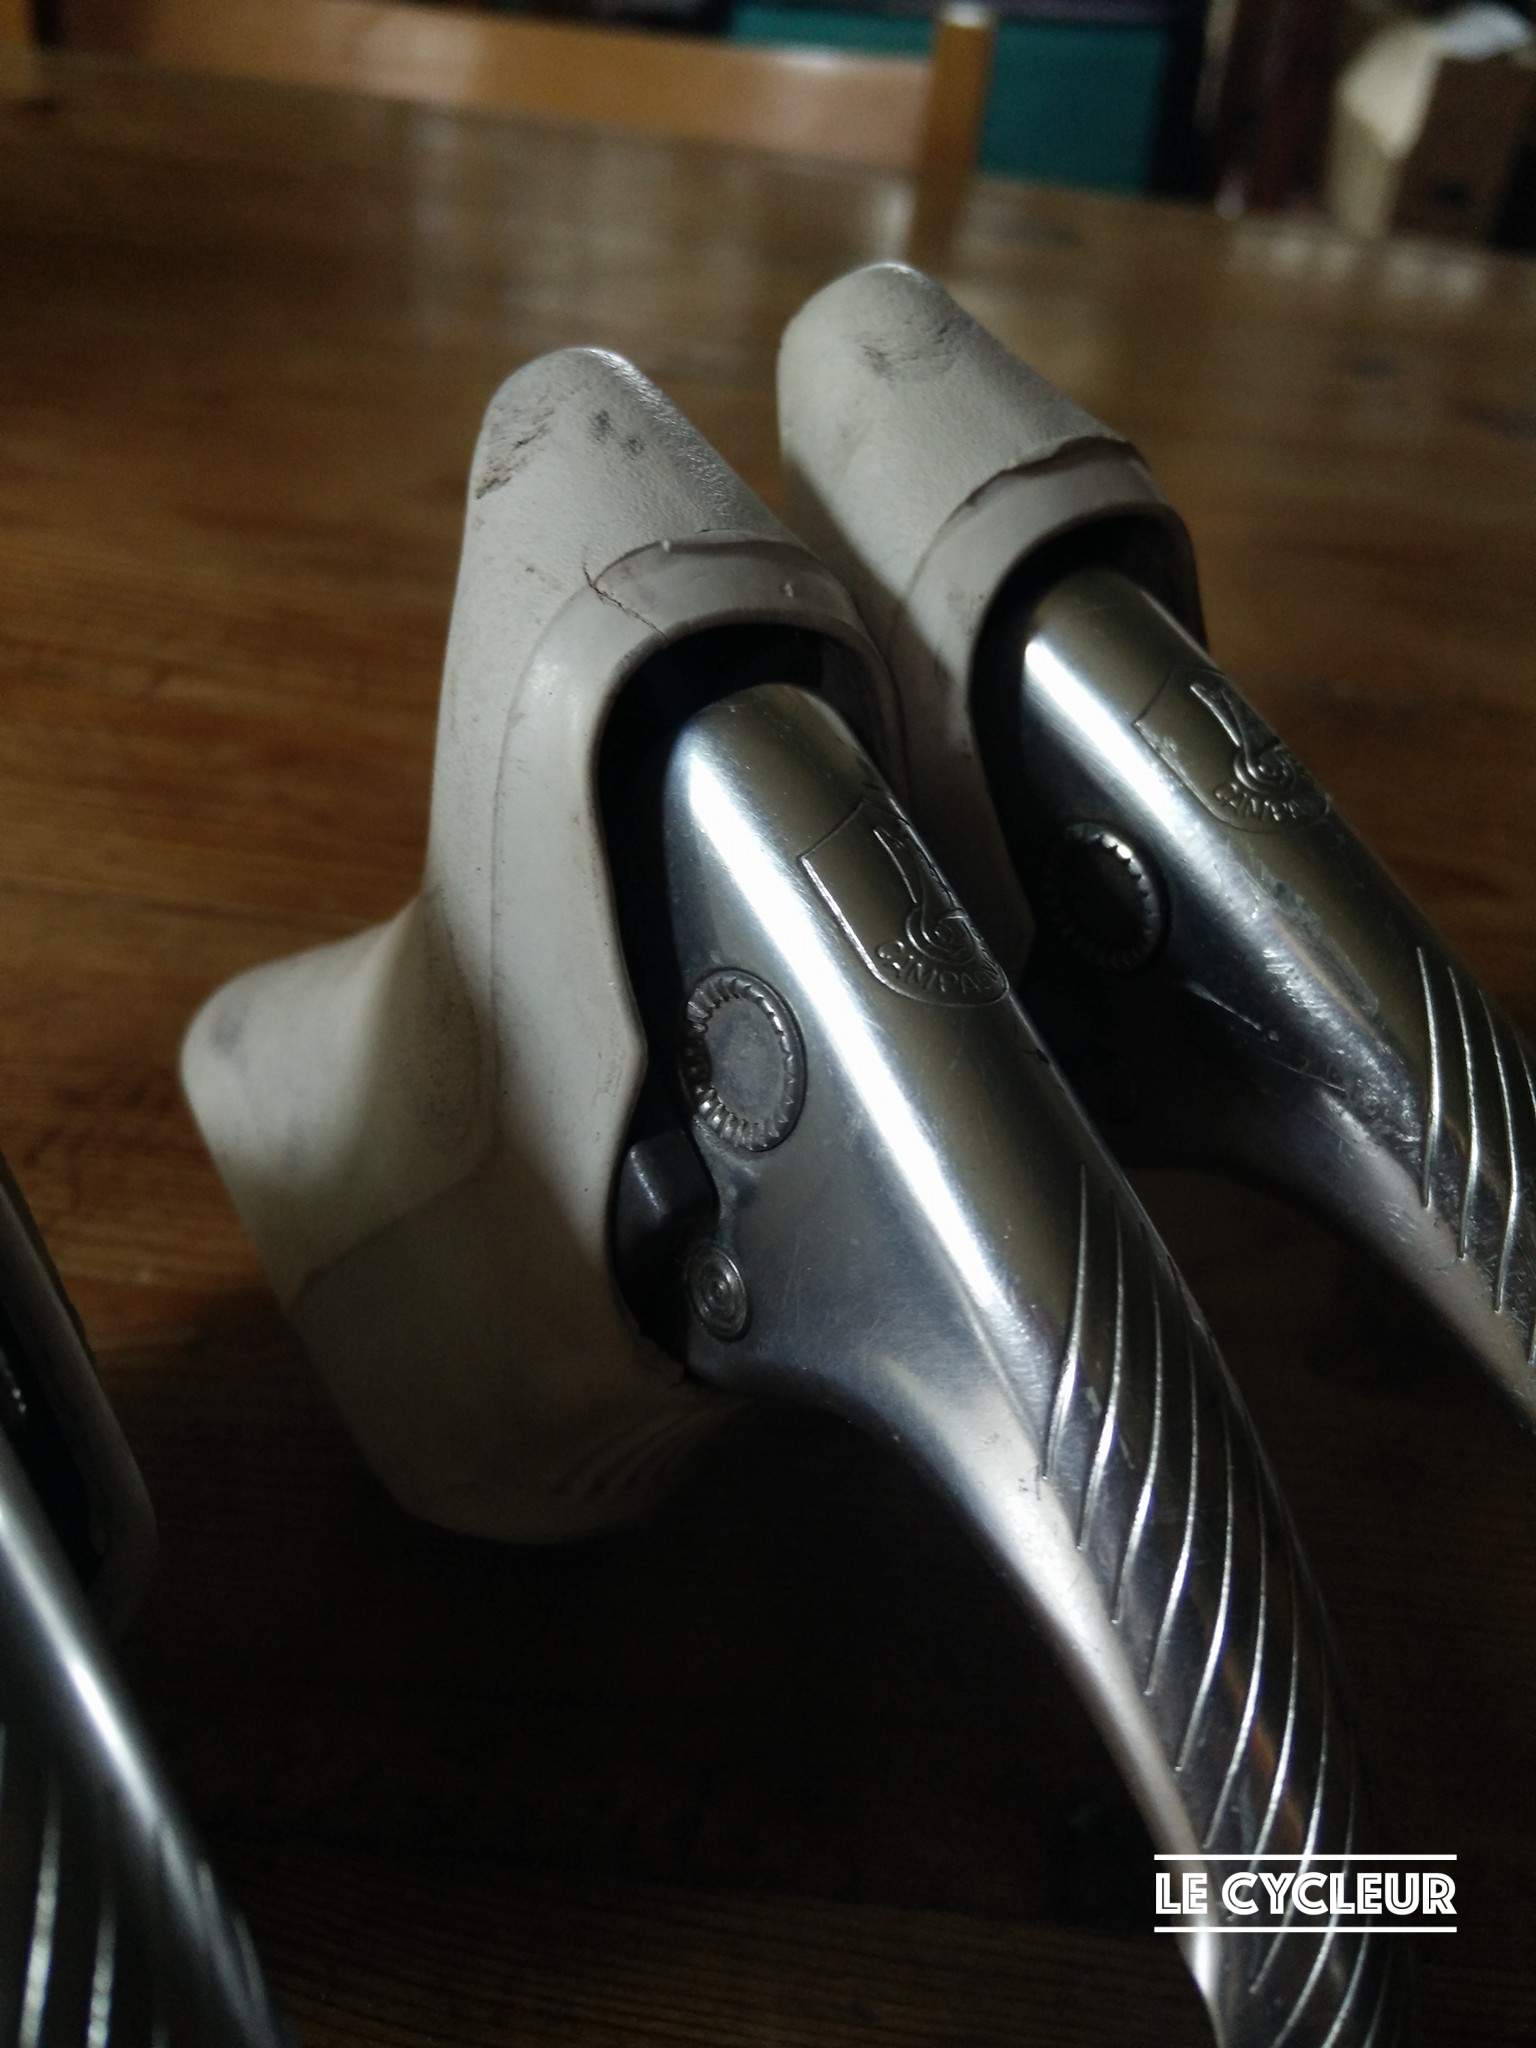 Second generation Campagnolo C-Record brake levers